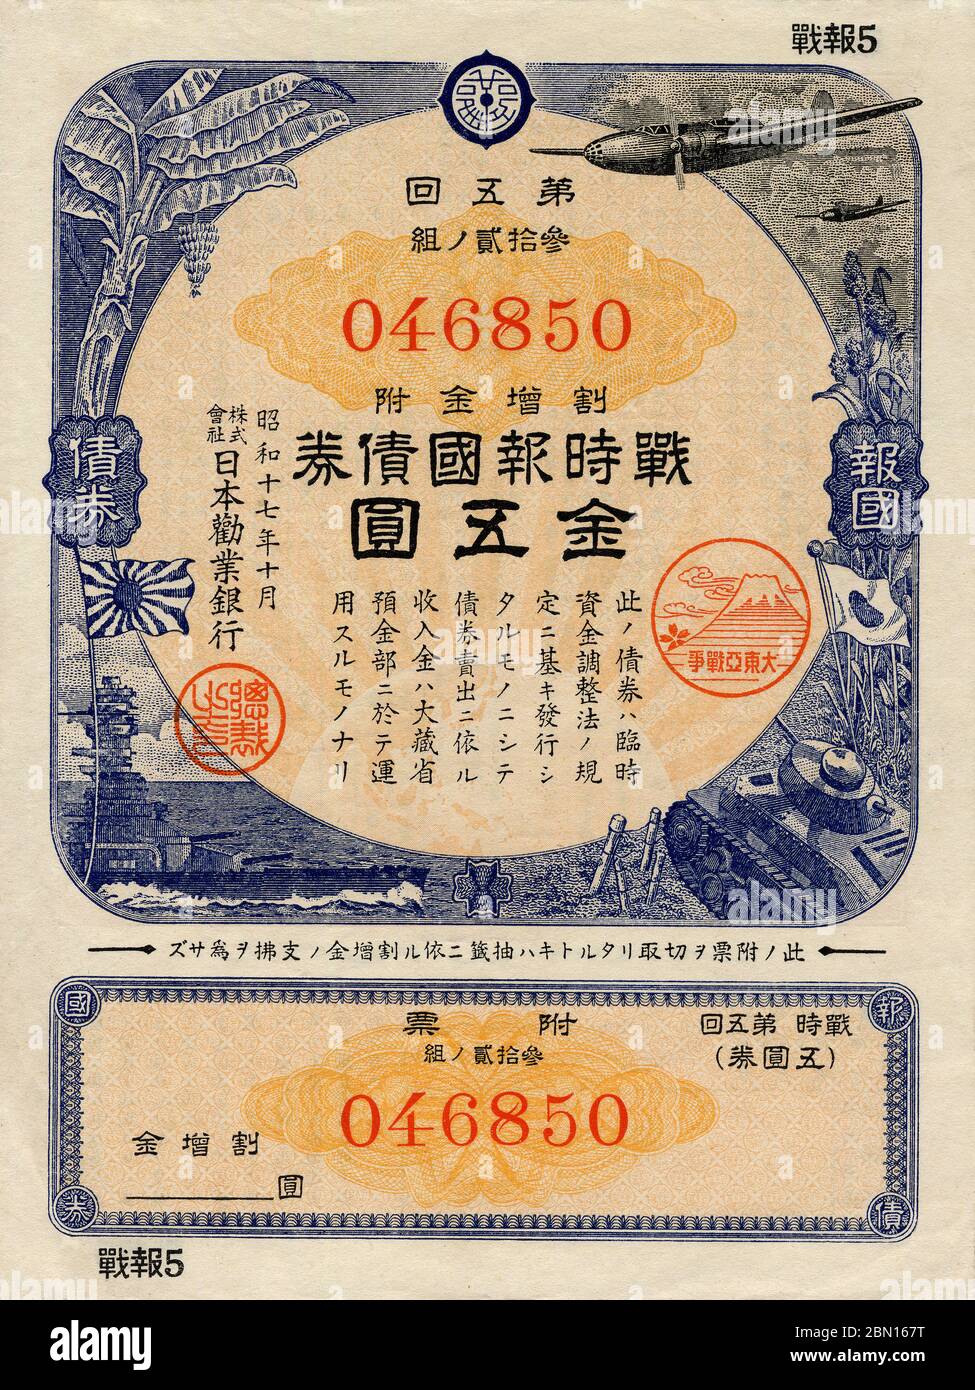 [ 1942 Japan - Japanese Pacific War Bond ] —   Pacific War Bond of 5 yen issued by the Imperial Government of Japan in 1942 (Showa 17), featuring Japanese WWII warplanes, a tank and a navy ship.  This is the 5th release of 21 releases. Release 2 through 7 all have the same so-called battle flags design. The 1st release and releases after the 7th show different designs.  In the 1930s and 1940s, 'voluntary' savings were so greatly encouraged to finance the Japanese war effort that by 1944 (Showa 19) Japanese households were saving an incredible 39.5% of disposable income.  20th century vintage b Stock Photo